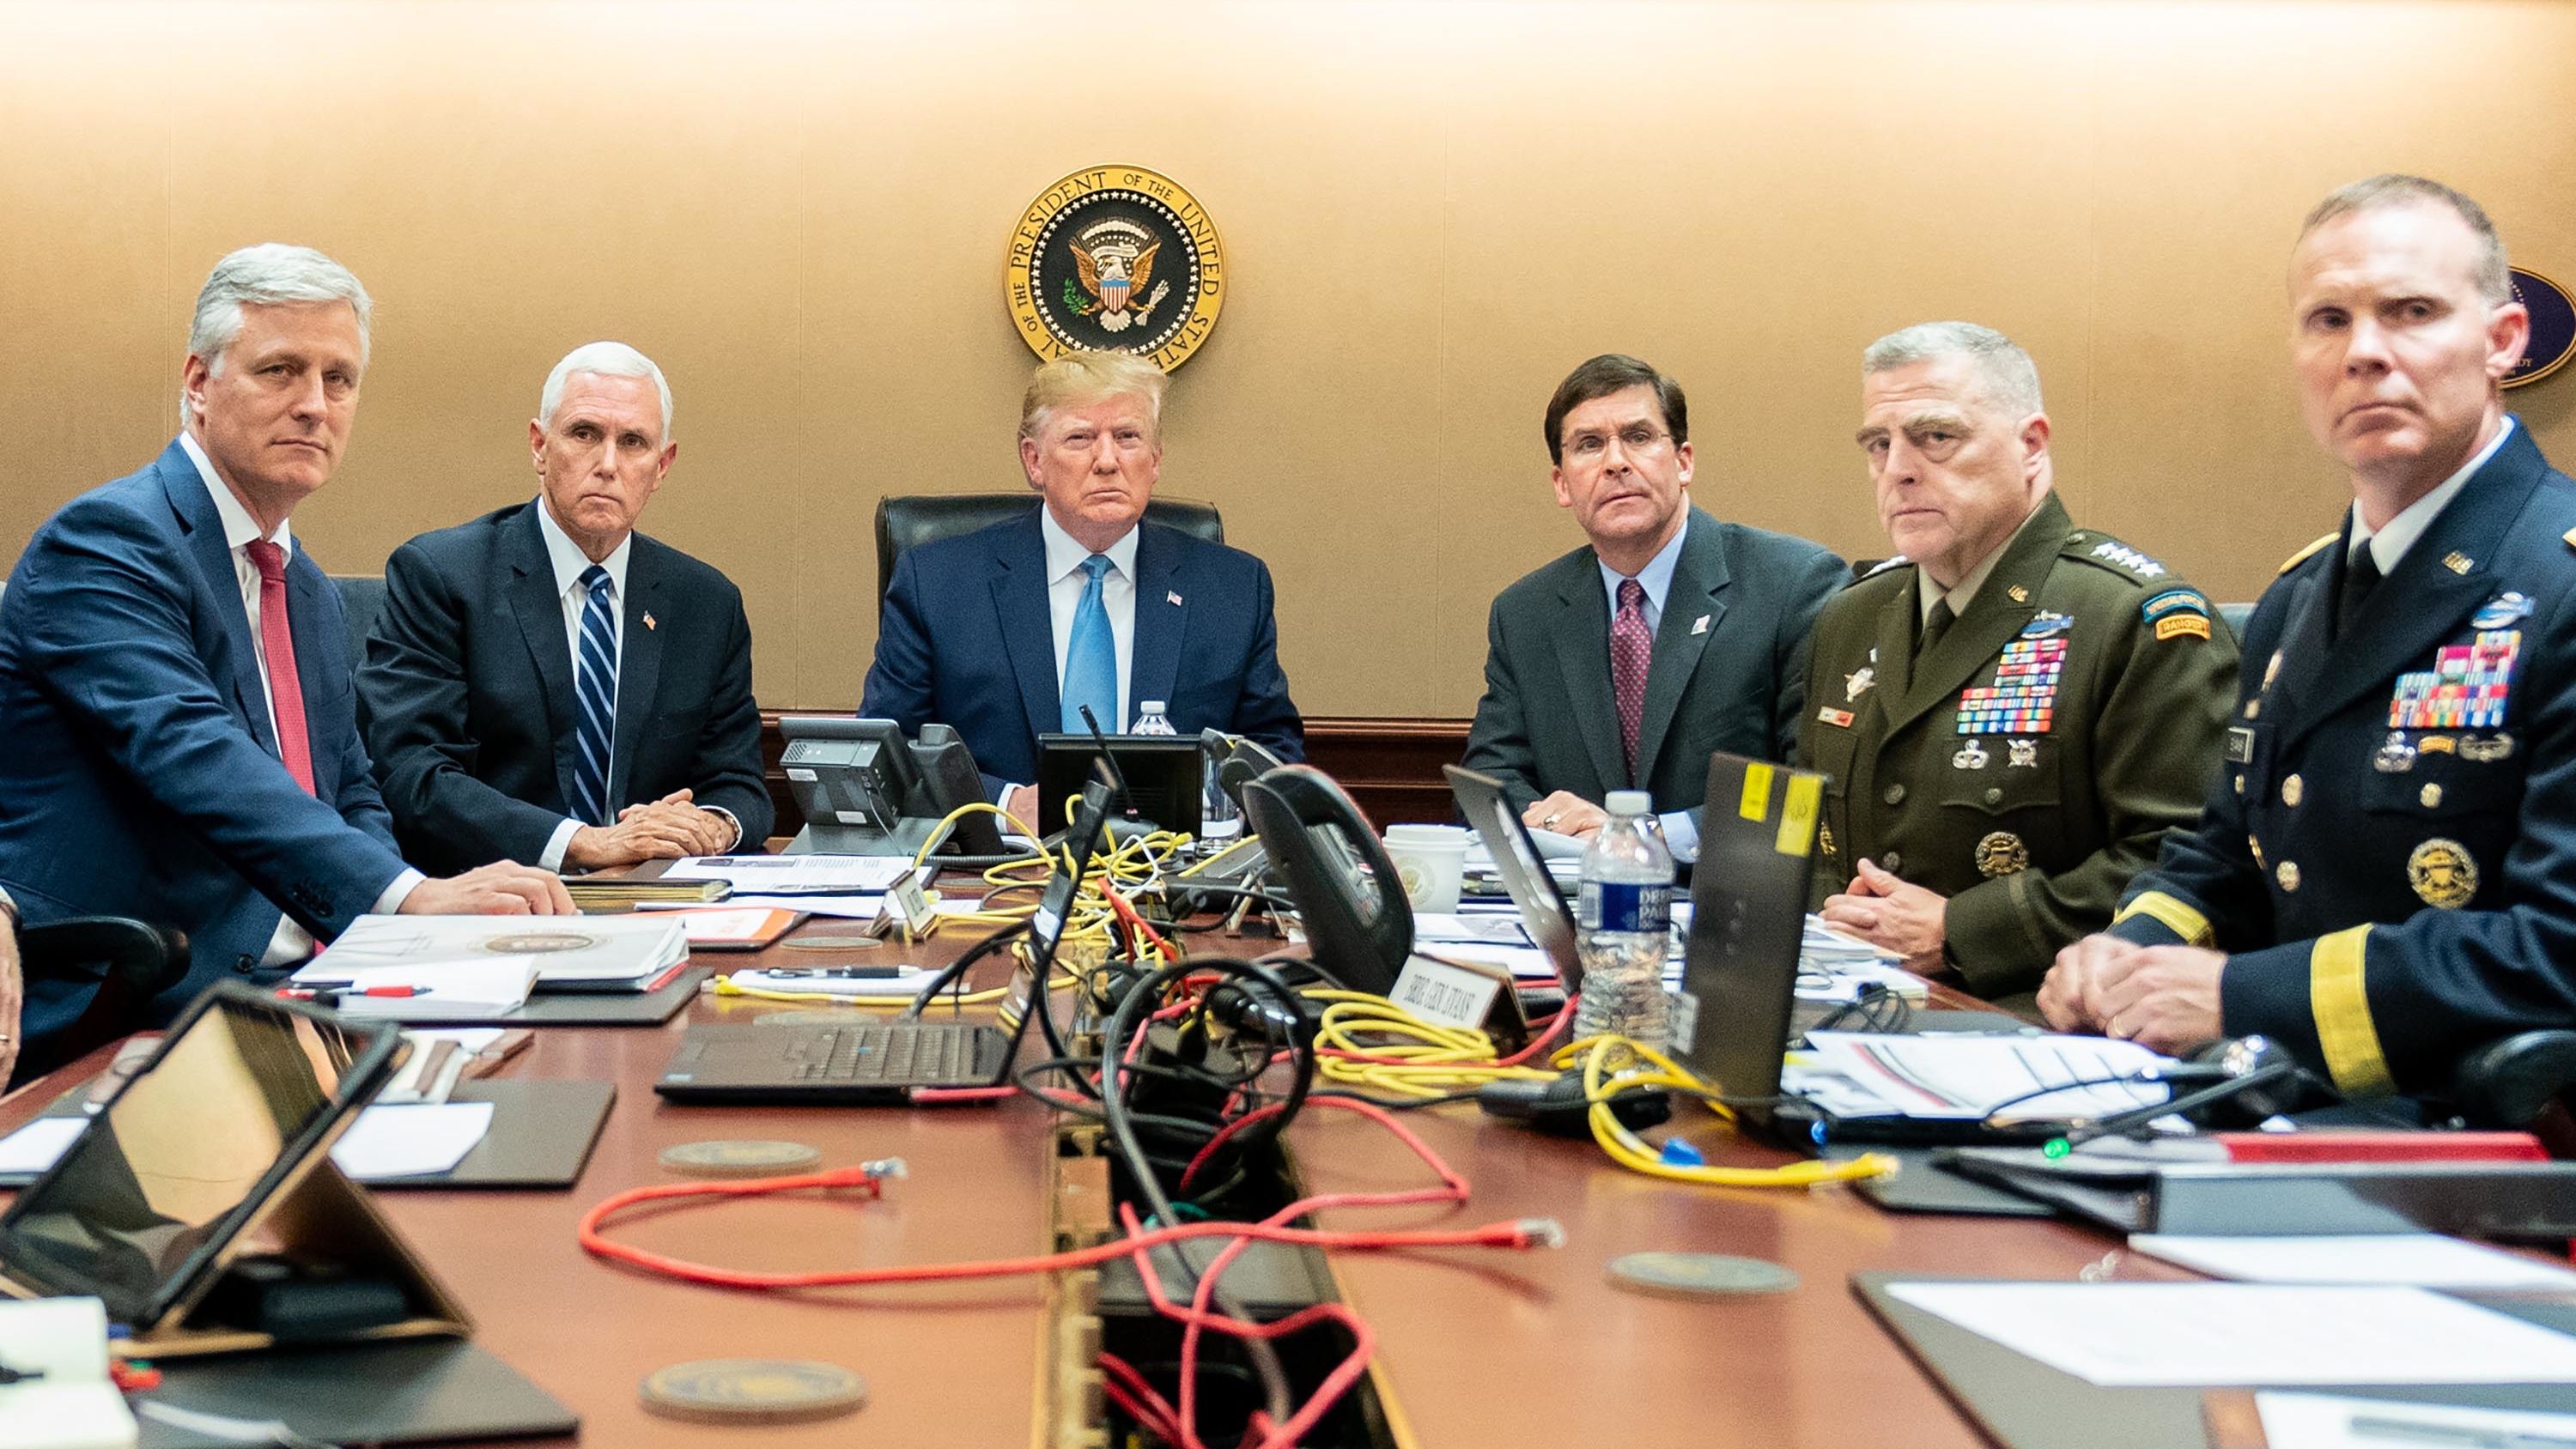 In this photo released by the White House, President Trump sits in the White House Situation Room, monitoring developments in the October 2019 military raid that killed ISIS leader Abu Bakr al-Baghdadi in northwest Syria. From left are national security adviser Robert O'Brien; Pence; Trump; Defense Secretary Mark Esper; Gen. Mark Milley, the chairman of the Joint Chiefs of Staff; and Brig. Gen. Marcus Evans, the deputy director for special operations on the Joint Staff.